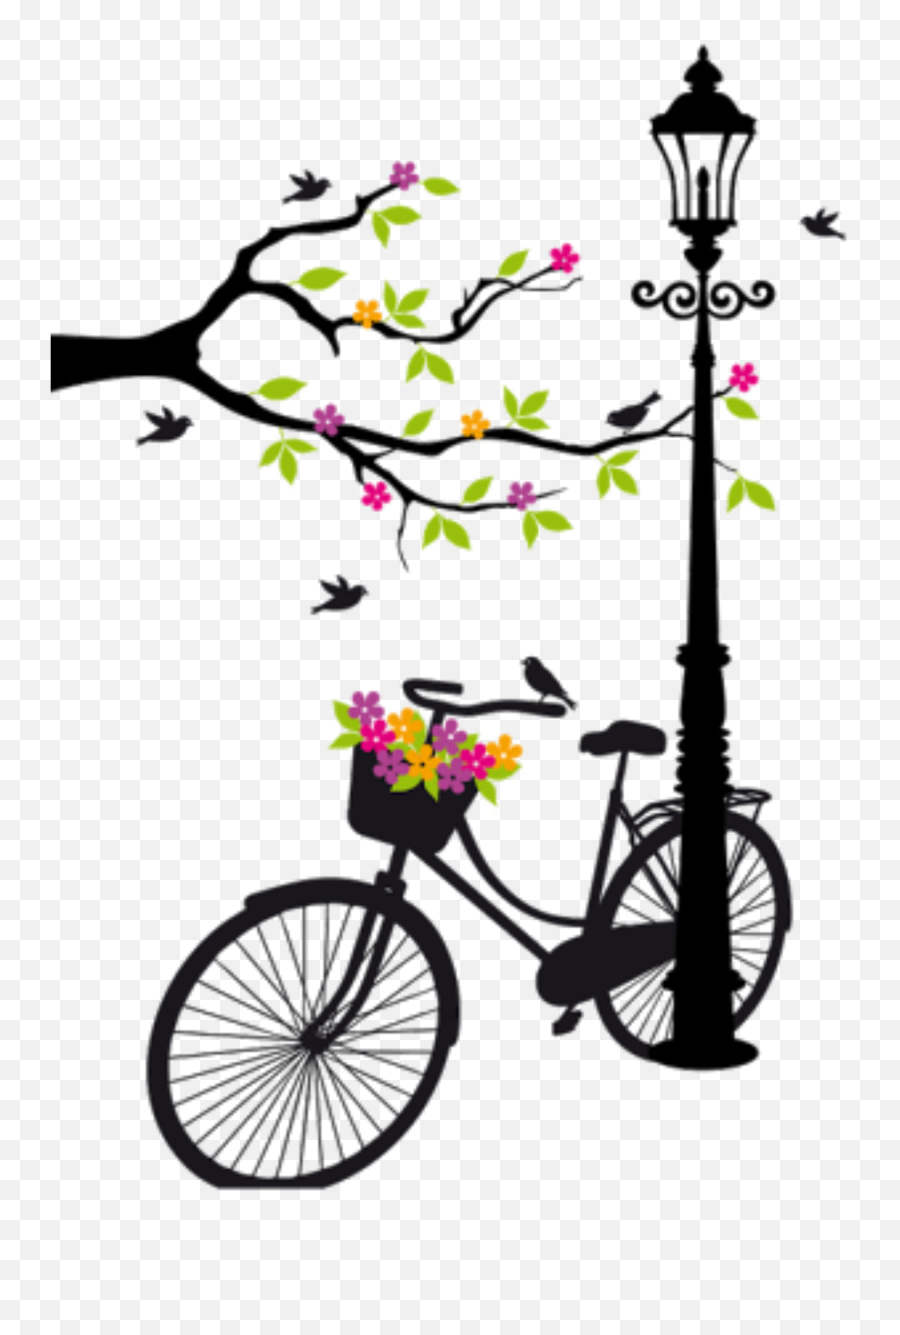 Bicycle Sticker By The Experimentrice - Old Bicycle With Flower Basket Birds And Lamp Emoji,Bicycle Emoji